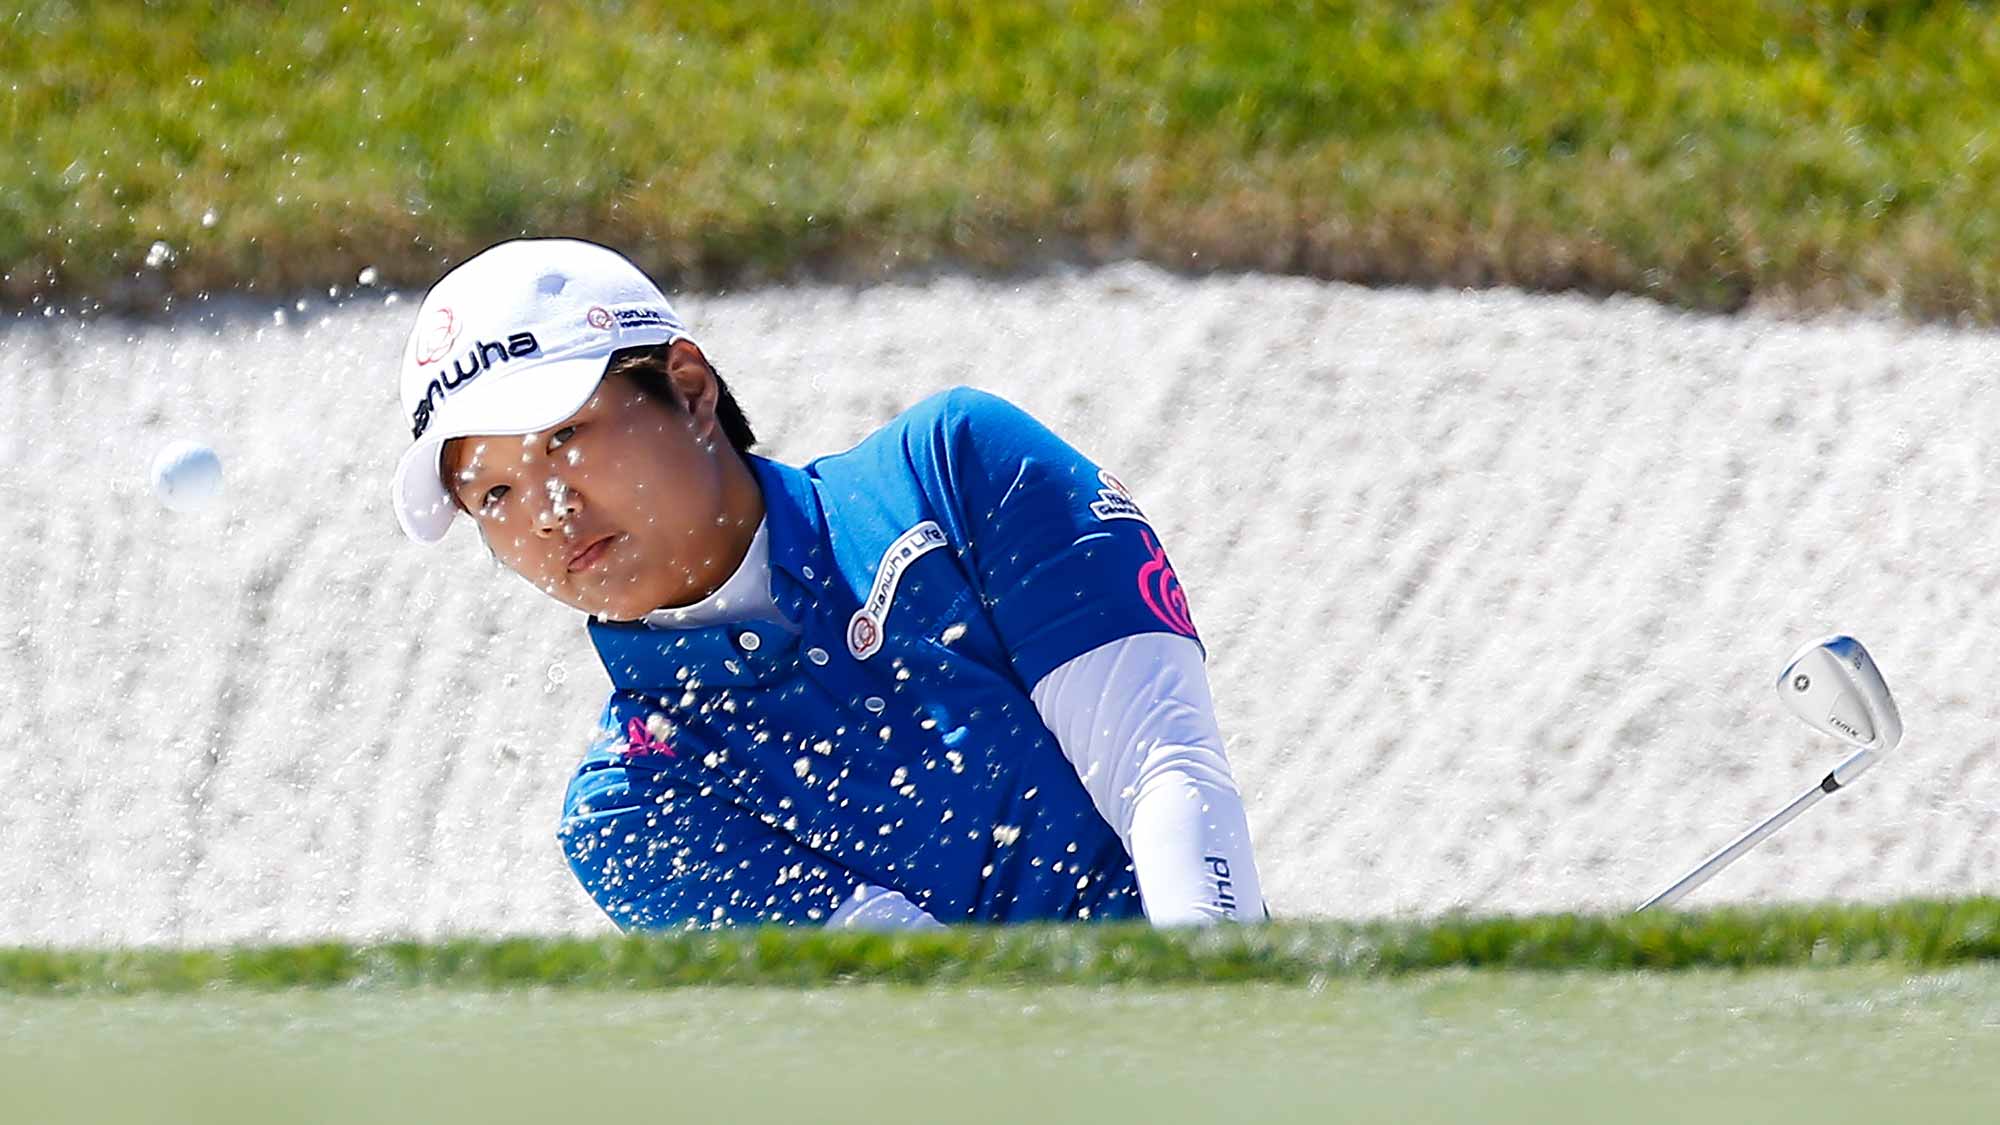 Haru Nomura of Japan hits out of the bunker on the 1st hole during the third round of the U.S. Women's Open at CordeValle Golf Club